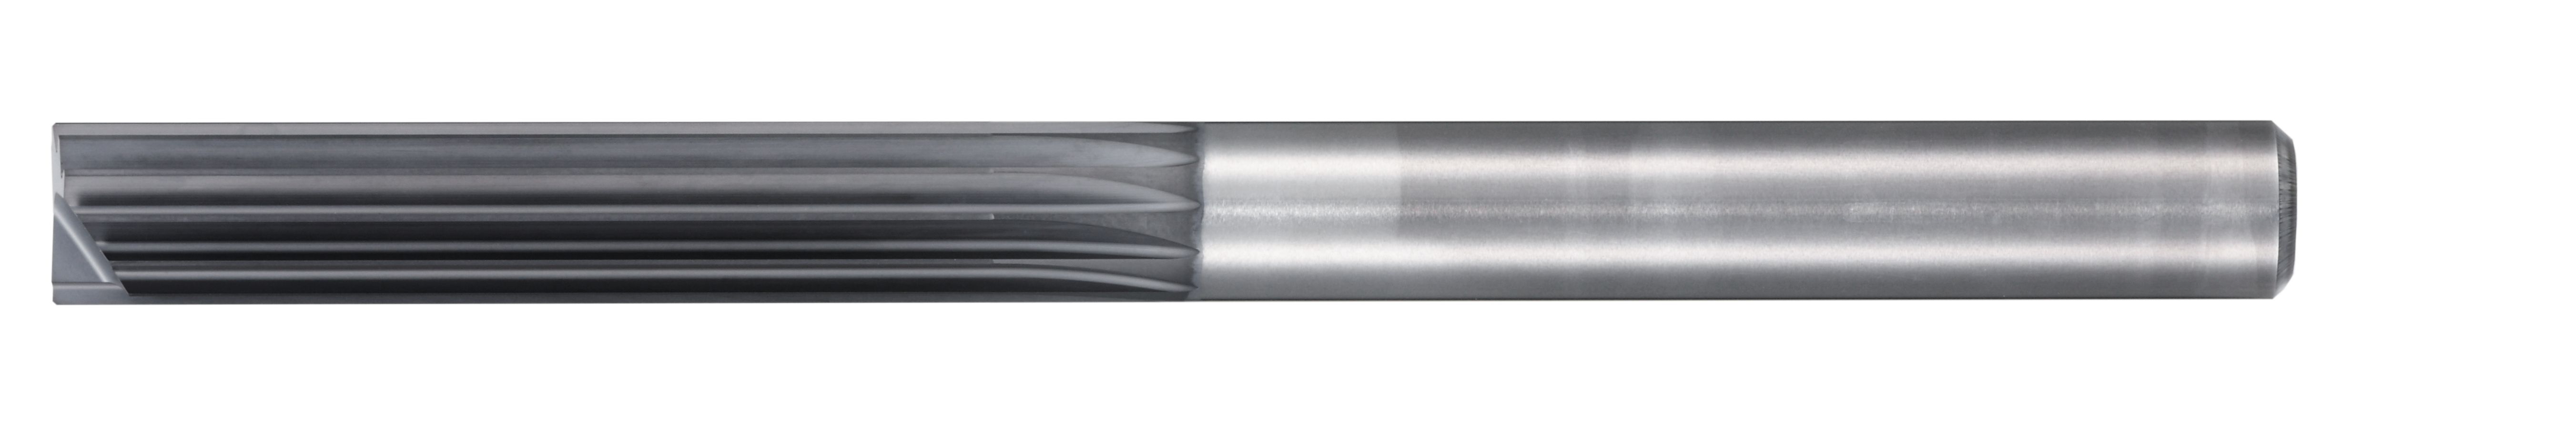 Grooving/Shouldering Multi-Flute End Mill for CFRP with End Flute CR100 6719 6719-016.000